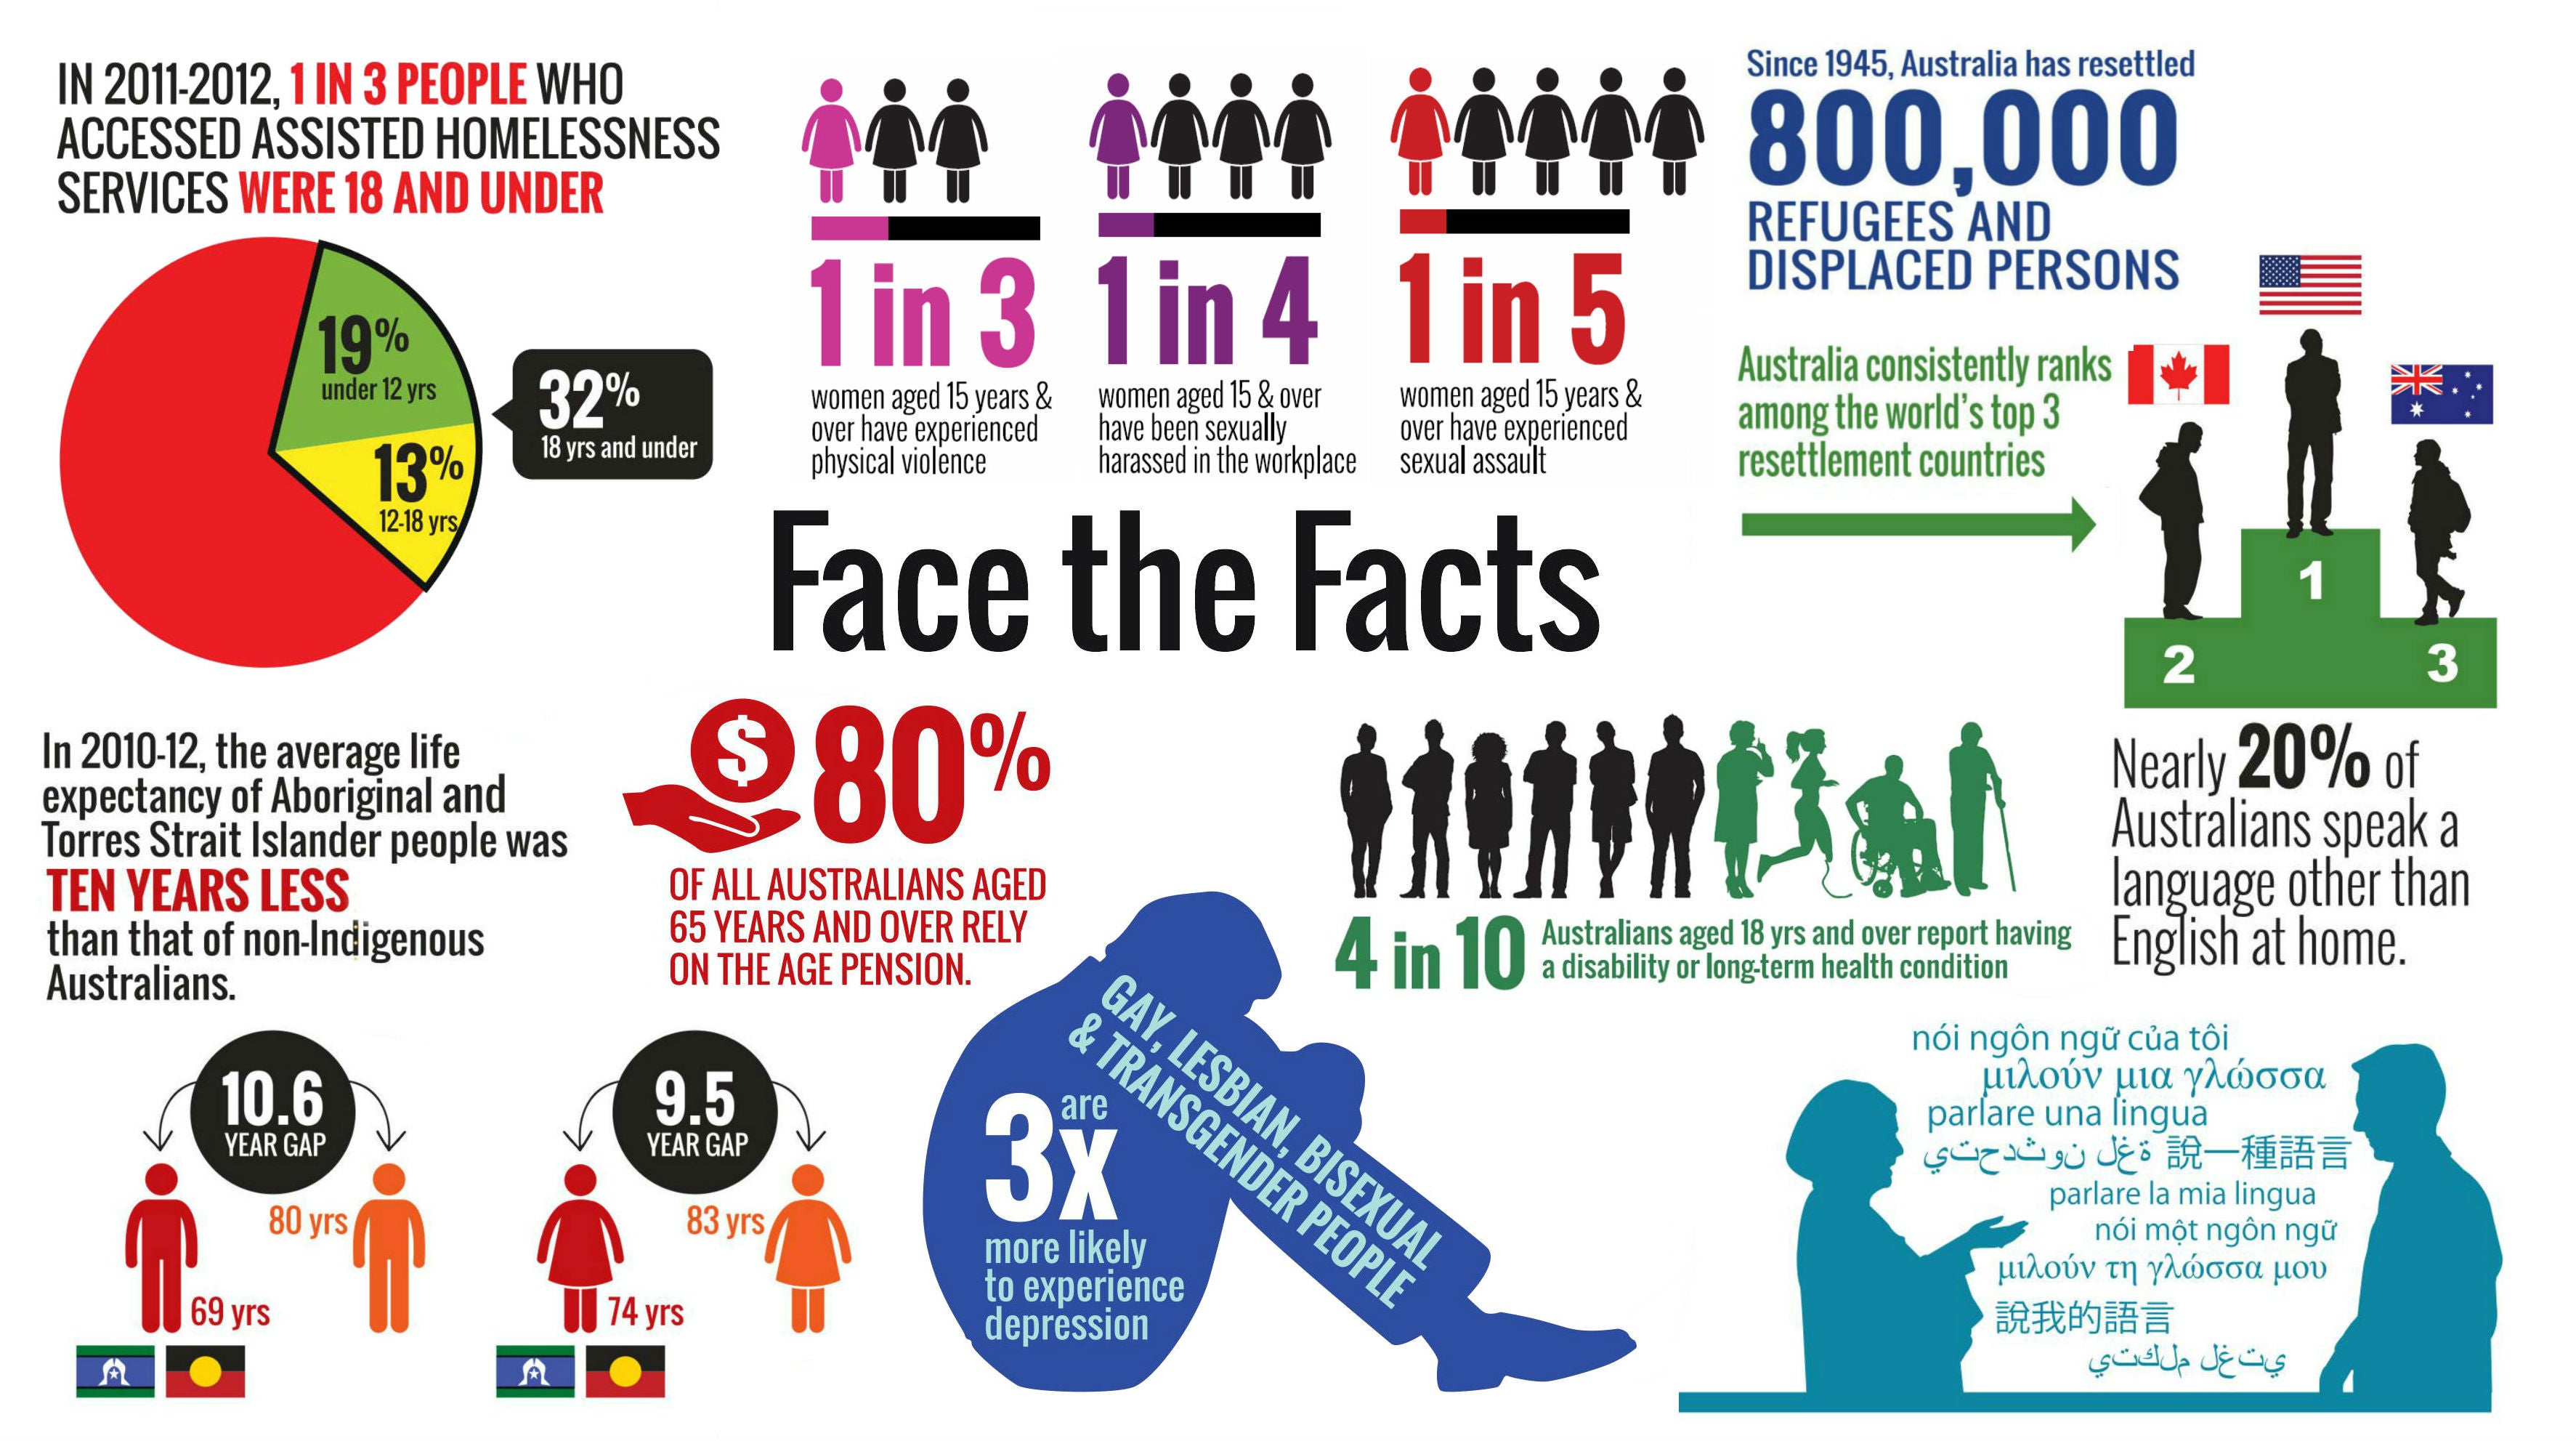 Face the facts statistics infographic (2012)